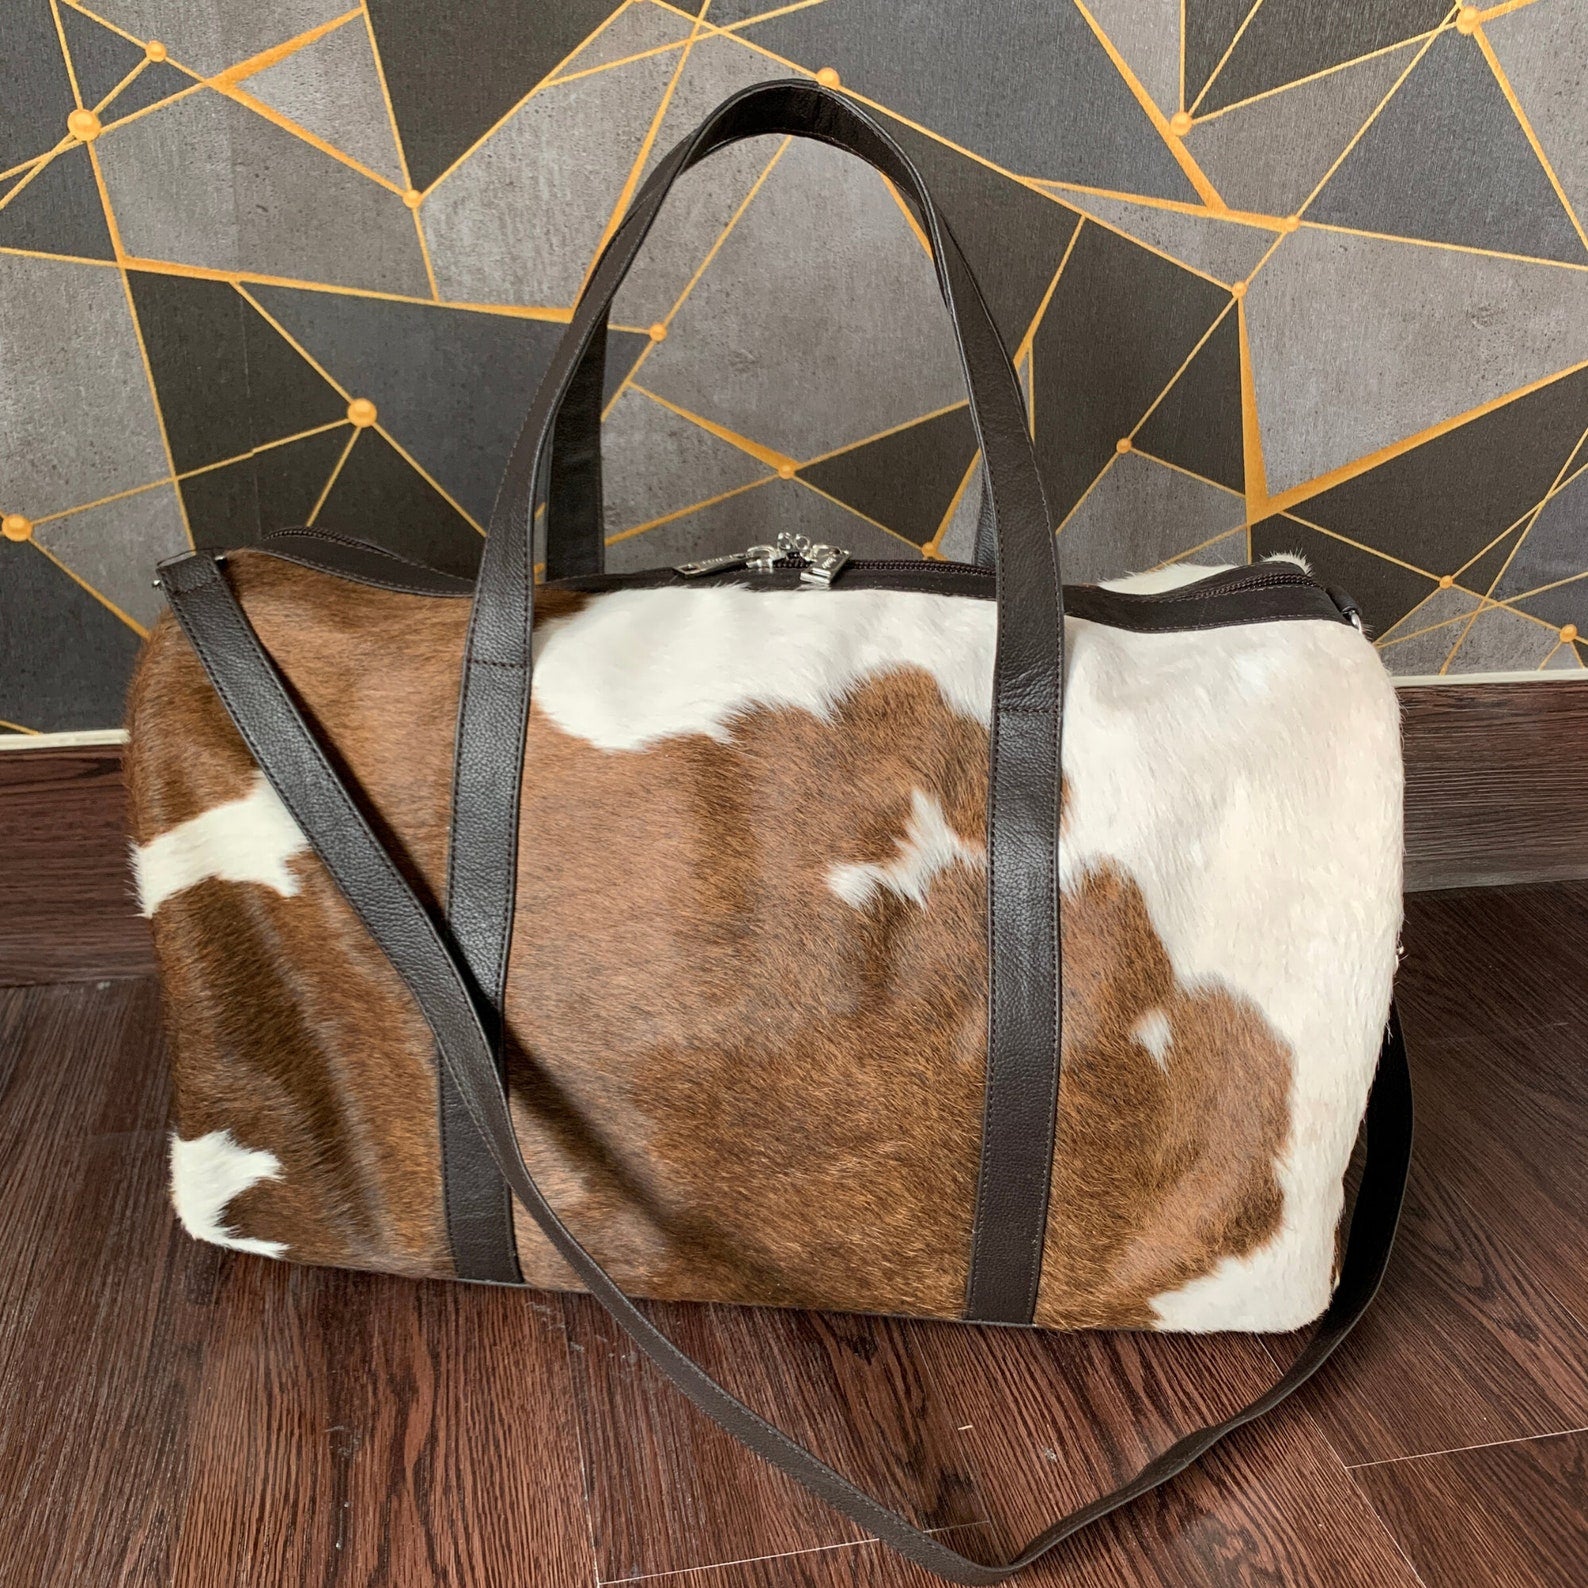  Stylish yet sturdy cowhide duffle bag for your travels. Timeless appeal.